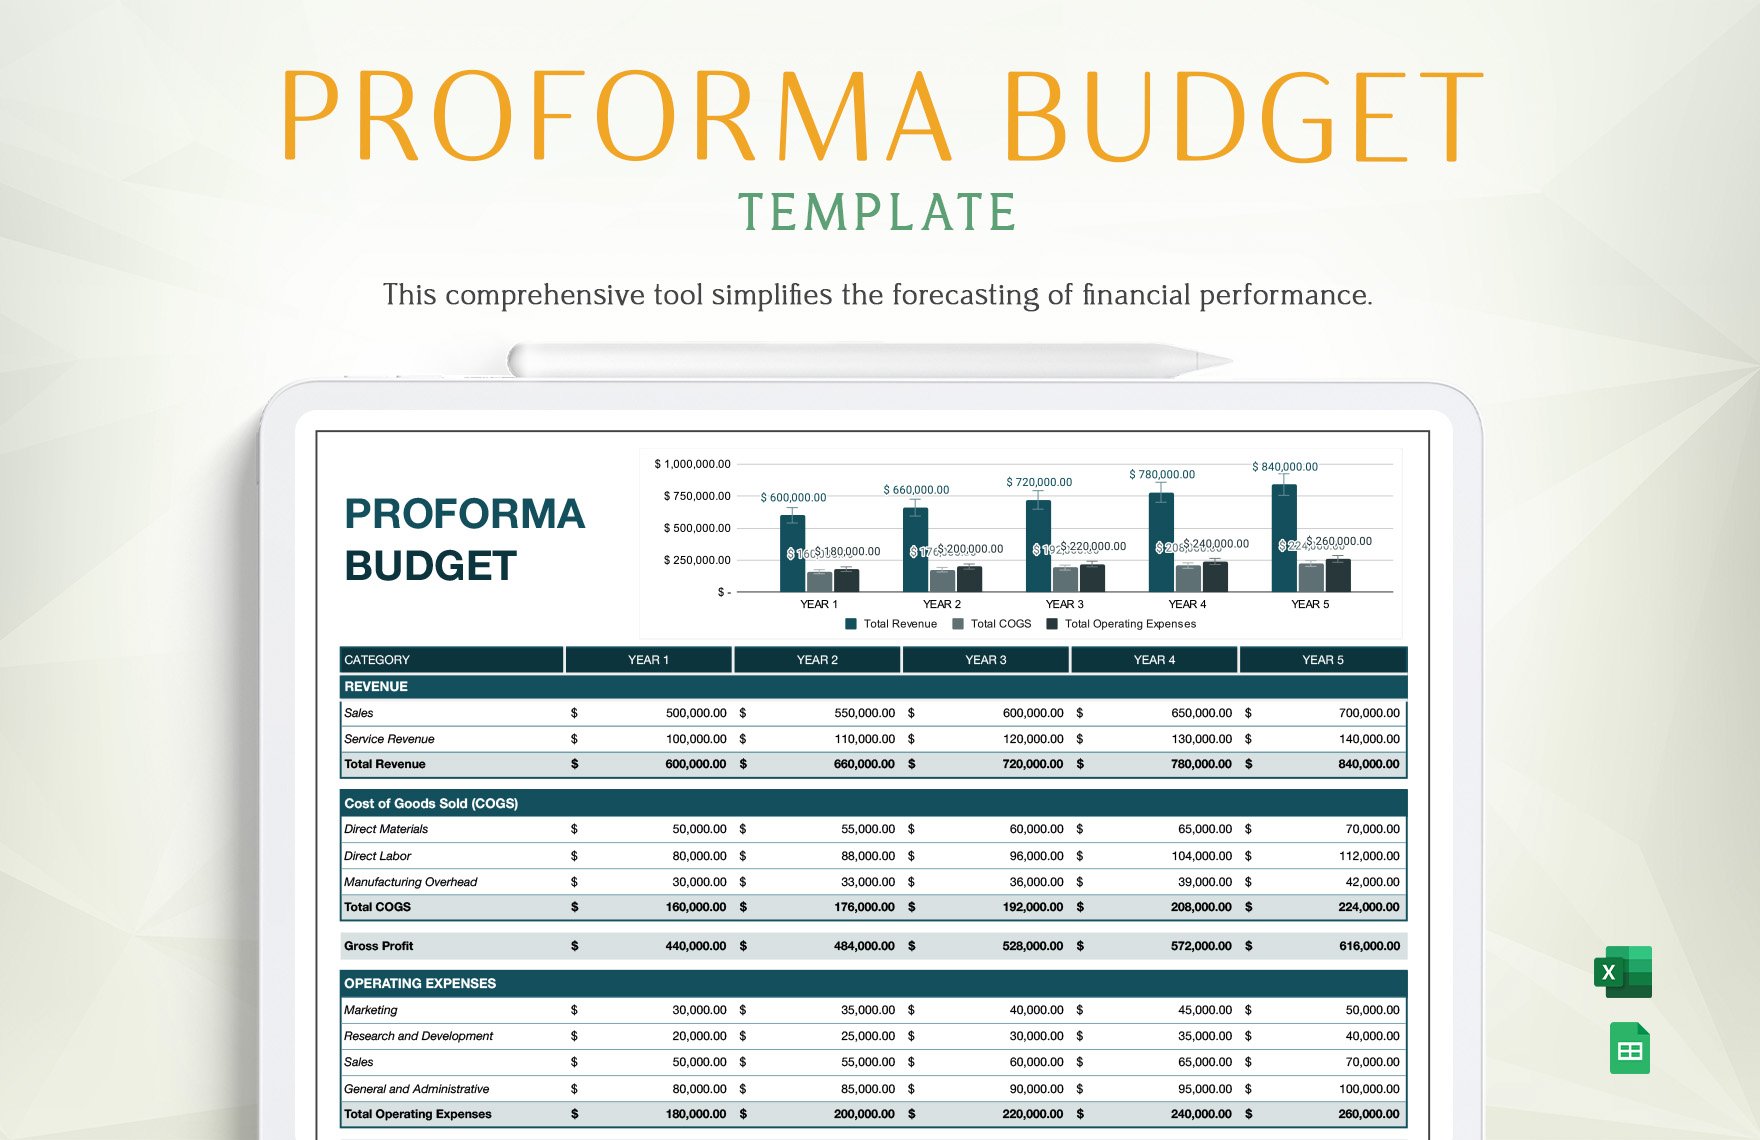 Proforma Budget Template in Excel, Google Sheets